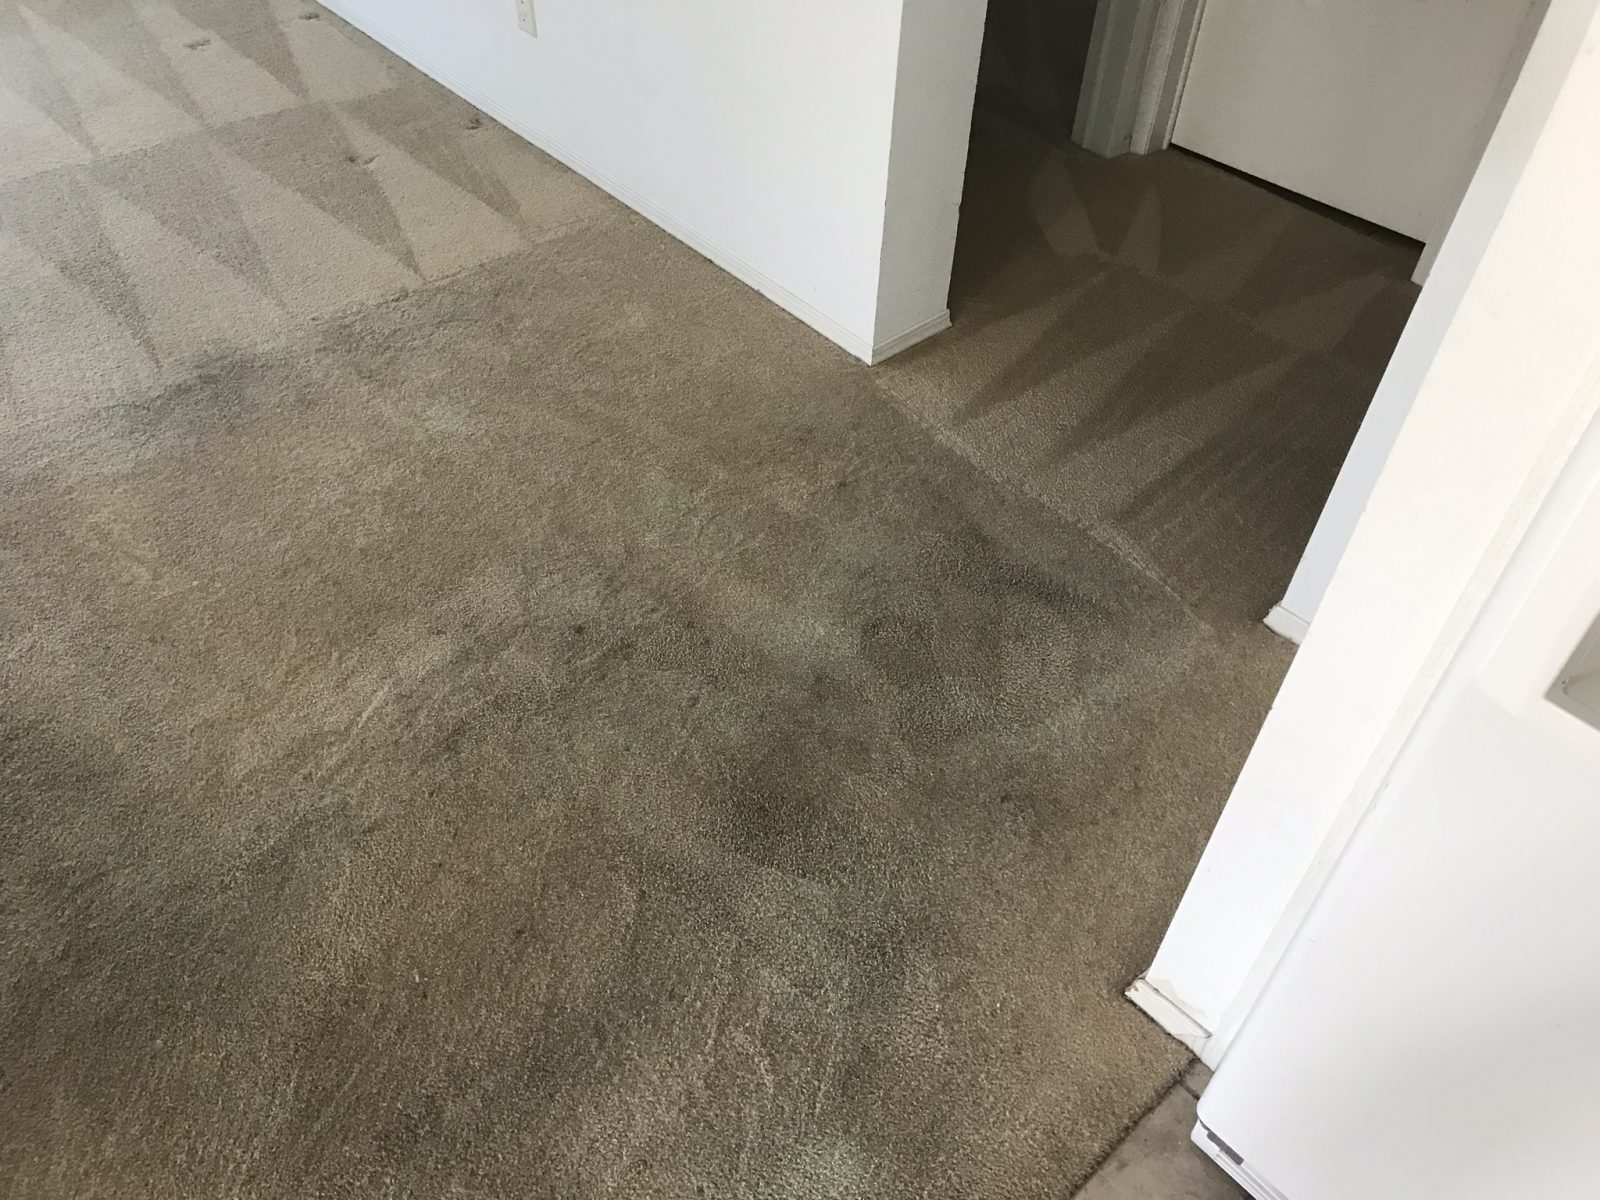 Professional Carpet Cleaning Tarpon Springs Florida by Howards Cleaning Service